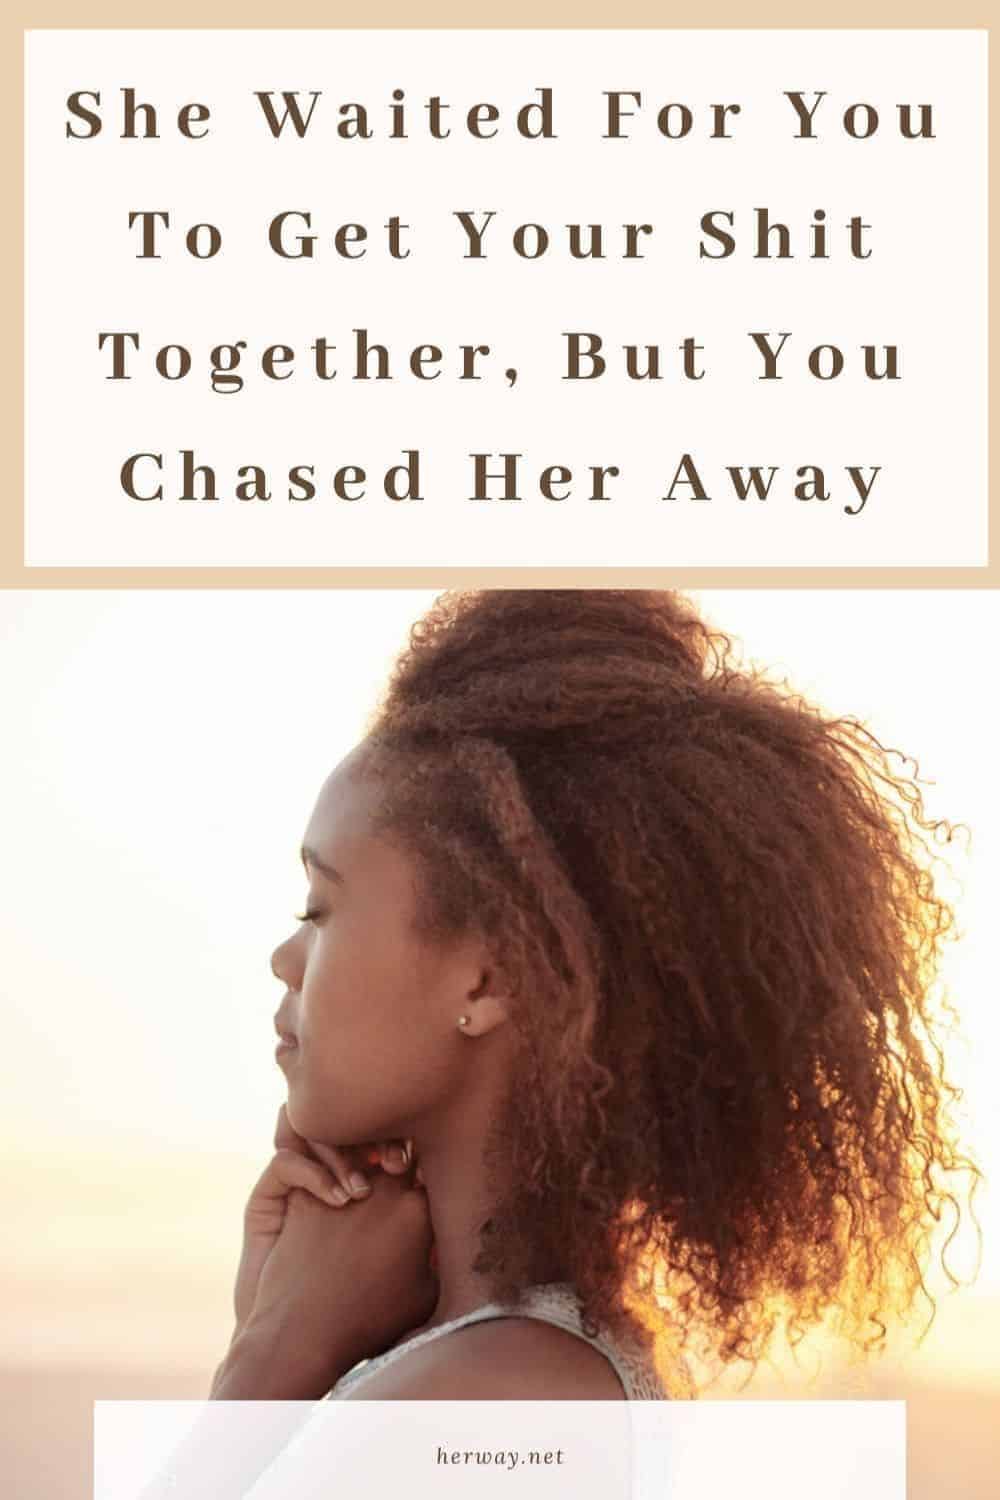 She Waited For You To Get Your Shit Together, But You Chased Her Away